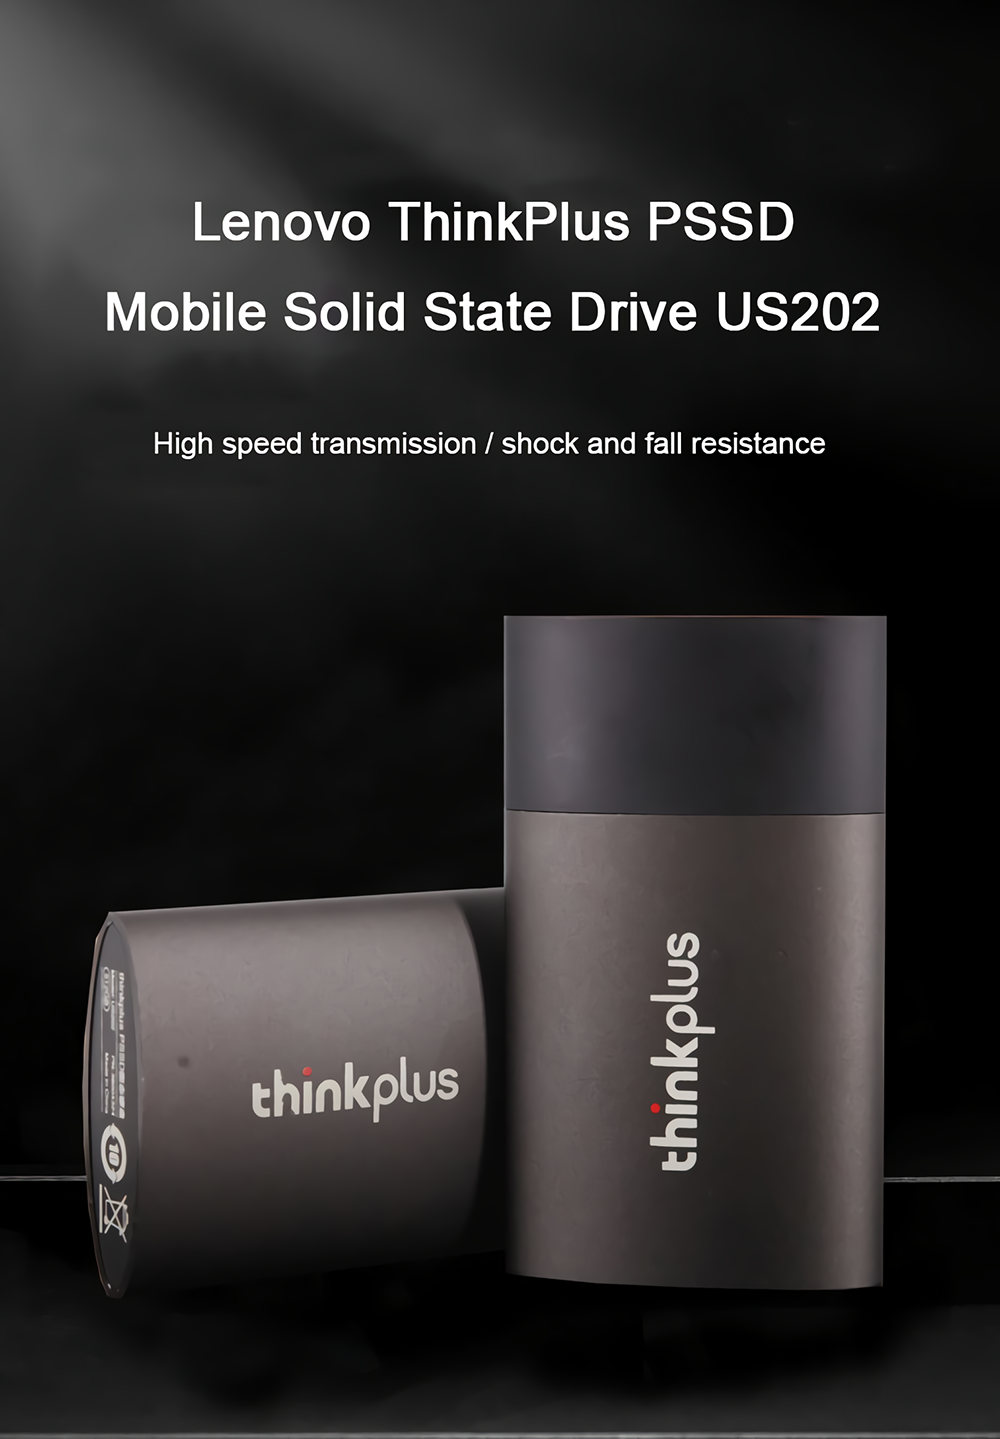 Lenovo-Thinkplus-Type-C31-PSSD-Mobile-Solid-State-Drive-Storage-Disk-512G-1TB-Hard-Drive-US202-1935569-1